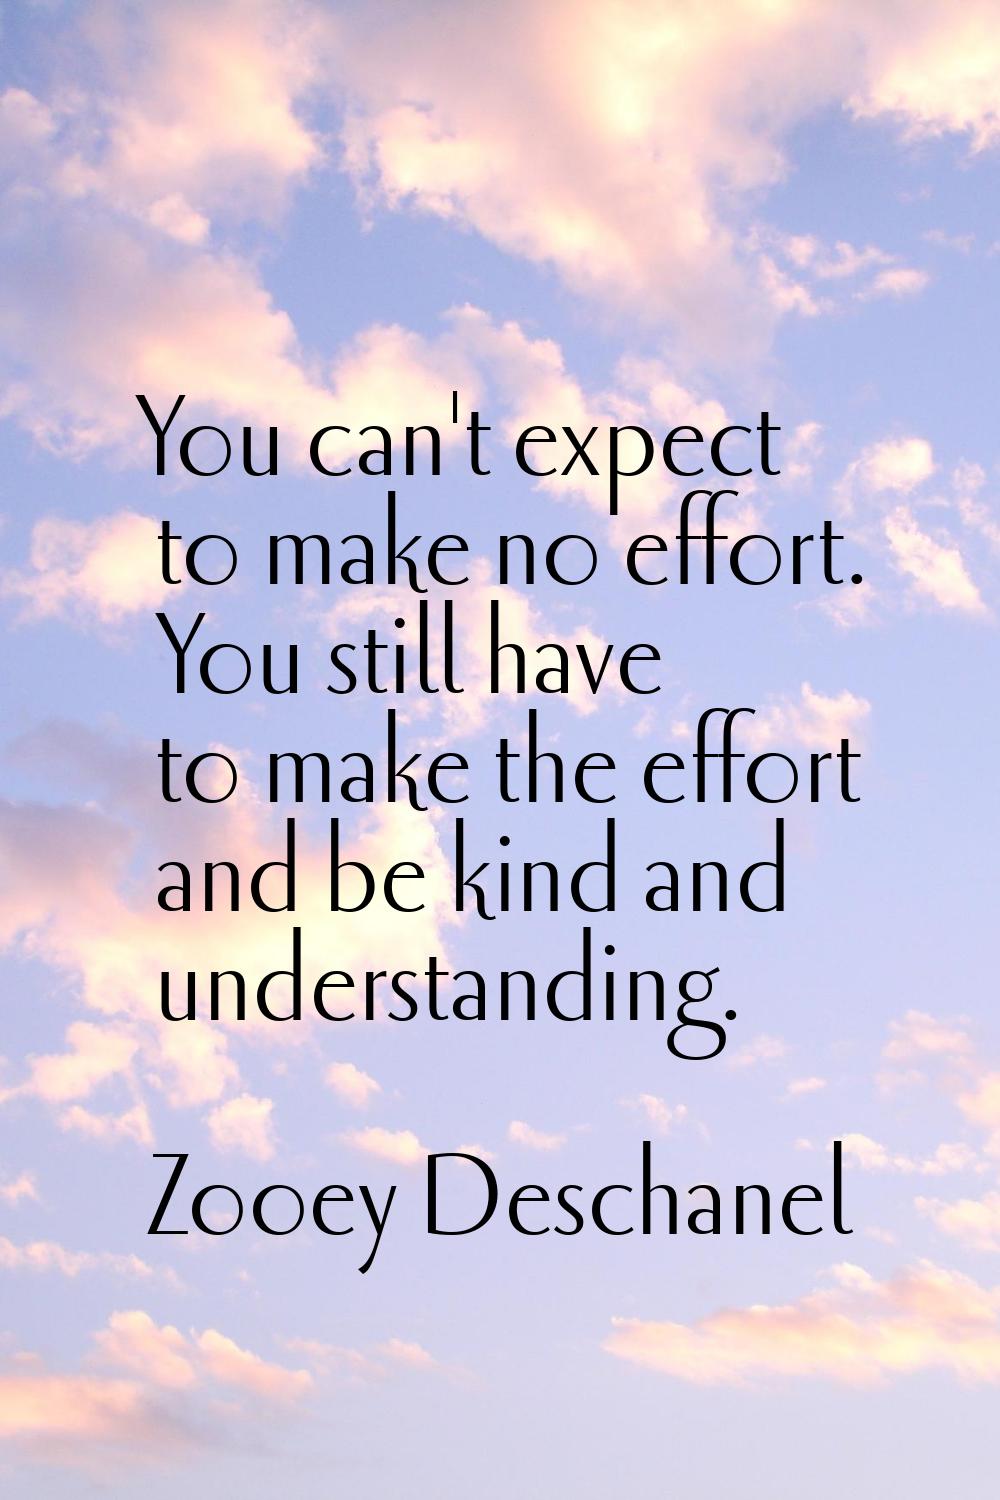 You can't expect to make no effort. You still have to make the effort and be kind and understanding